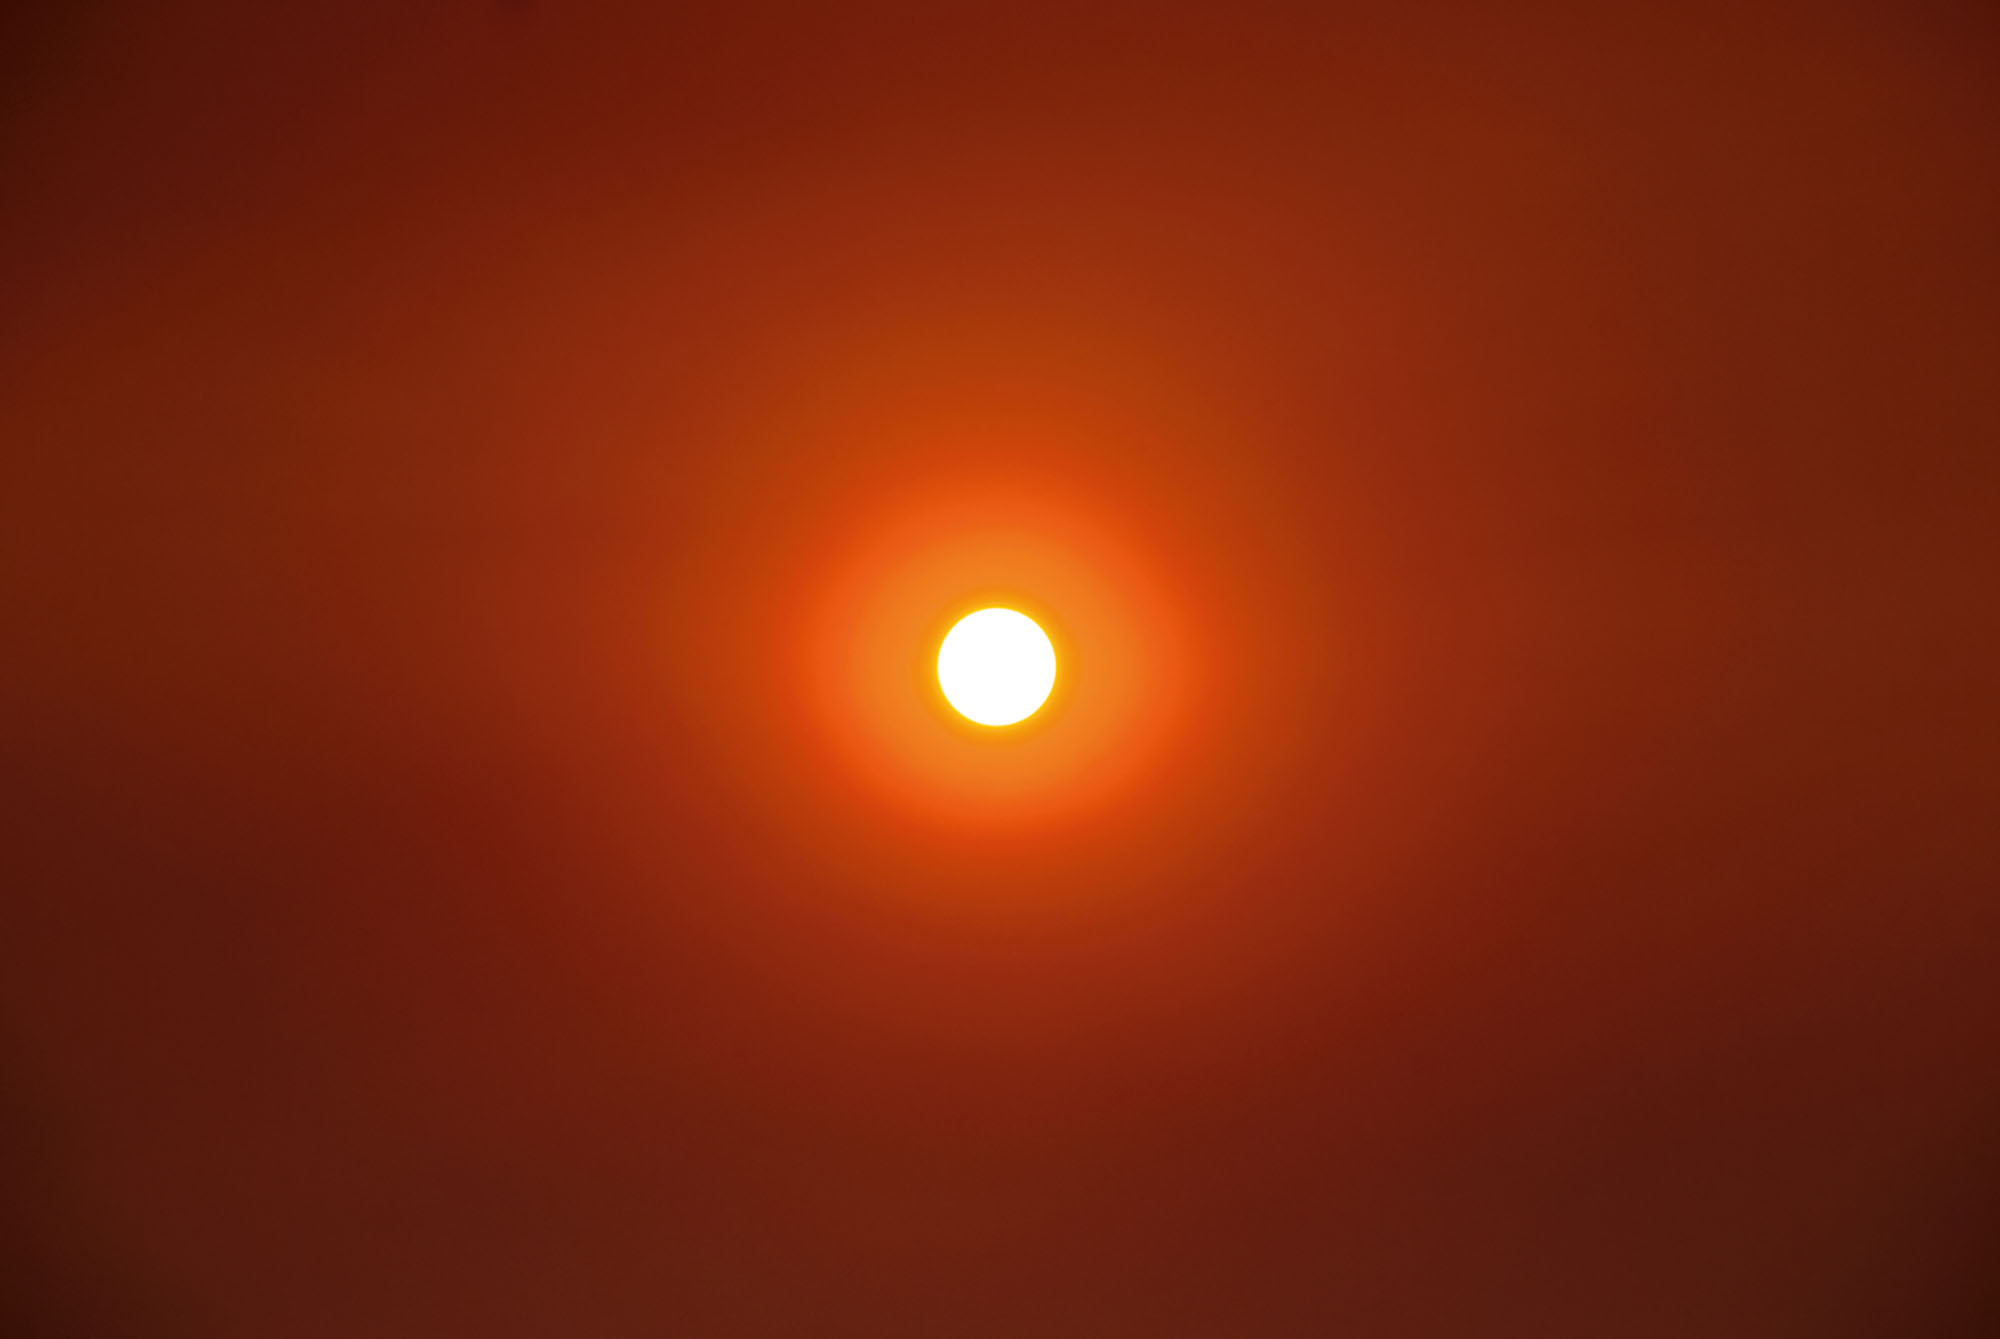 Nicholas Mangan, *Friday the 13th*, 2009, C-type print, 98.5 × 68.5 cm. Picture of the sun on the 13th of February, seven days after the Black Saturday bush fires in Victoria, Australia.